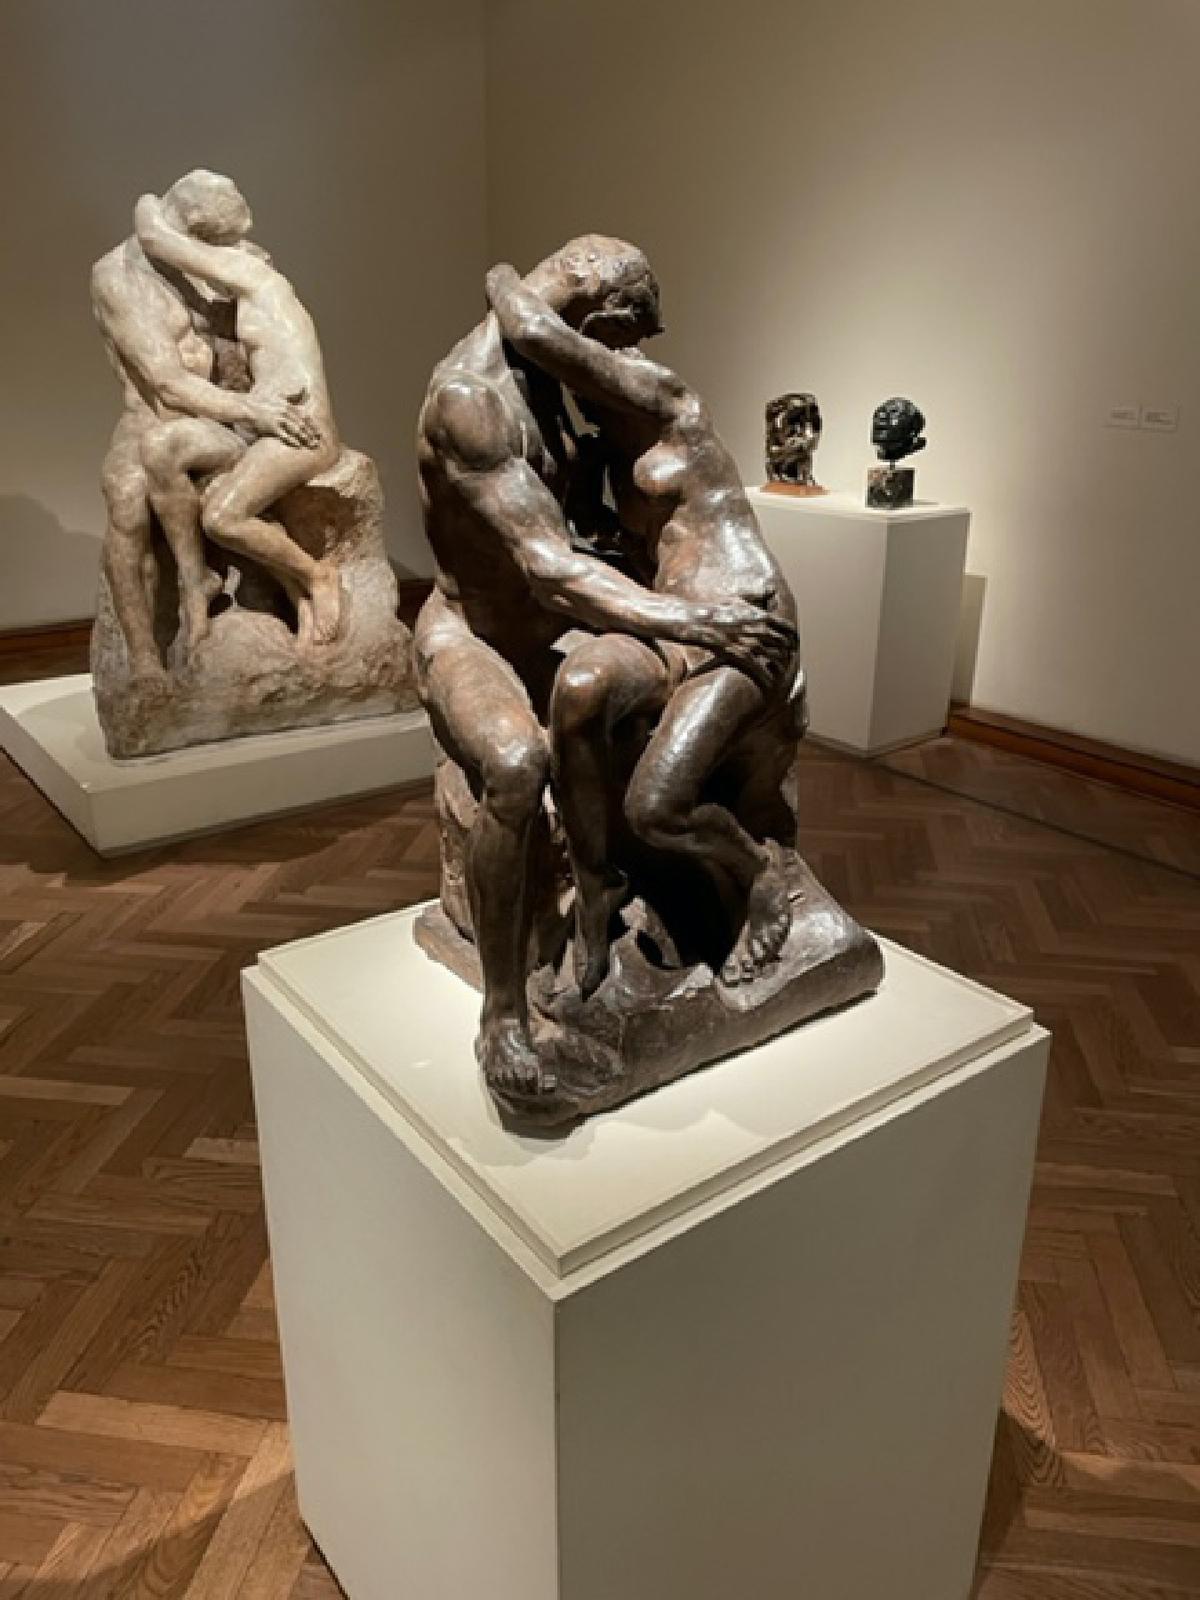 A small bronze version of “The Kiss” by Rodin sits near the larger marble sculpture in the National Fine Arts Museum in Buenos Aires, Argentina. (Courtesy of Lesley Frederikson)